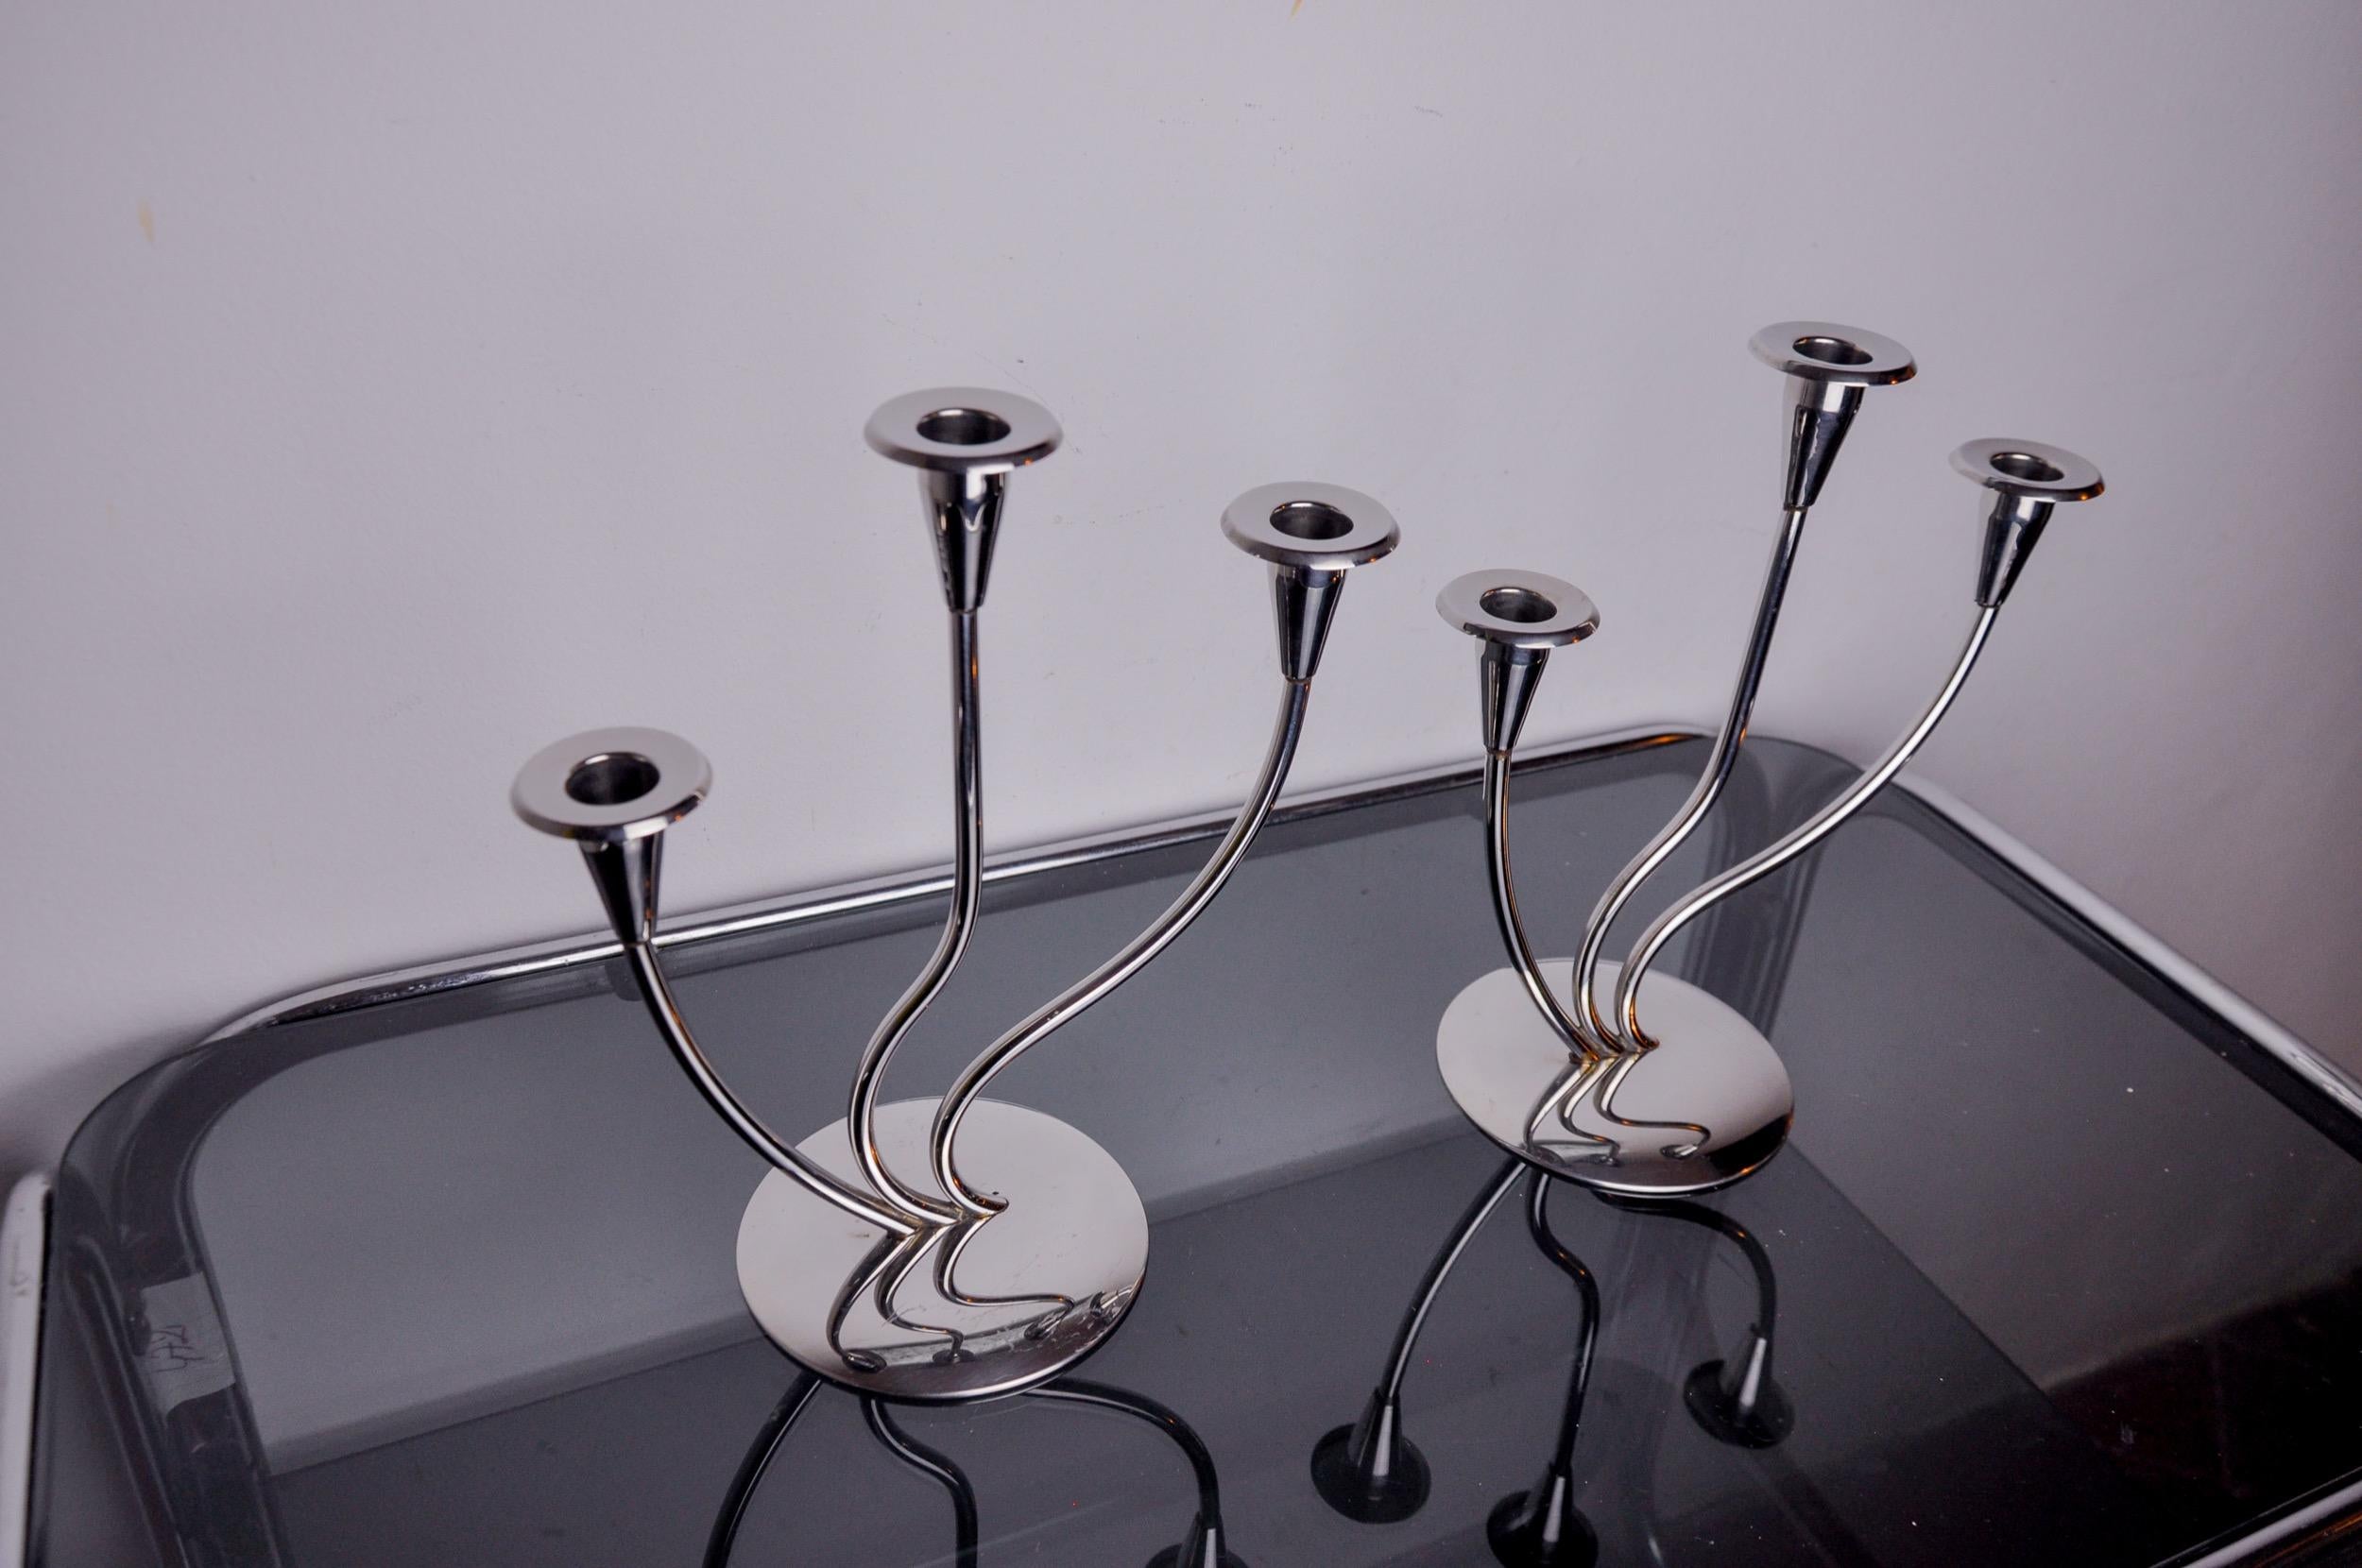 Very nice pair of art deco candlesticks in stainless steel designated and produced in Spain in the 1970s. Structure in 18/8 stainless steel that can accommodate 3 candles. Superb designer object that will decorate your interior wonderfully. Good